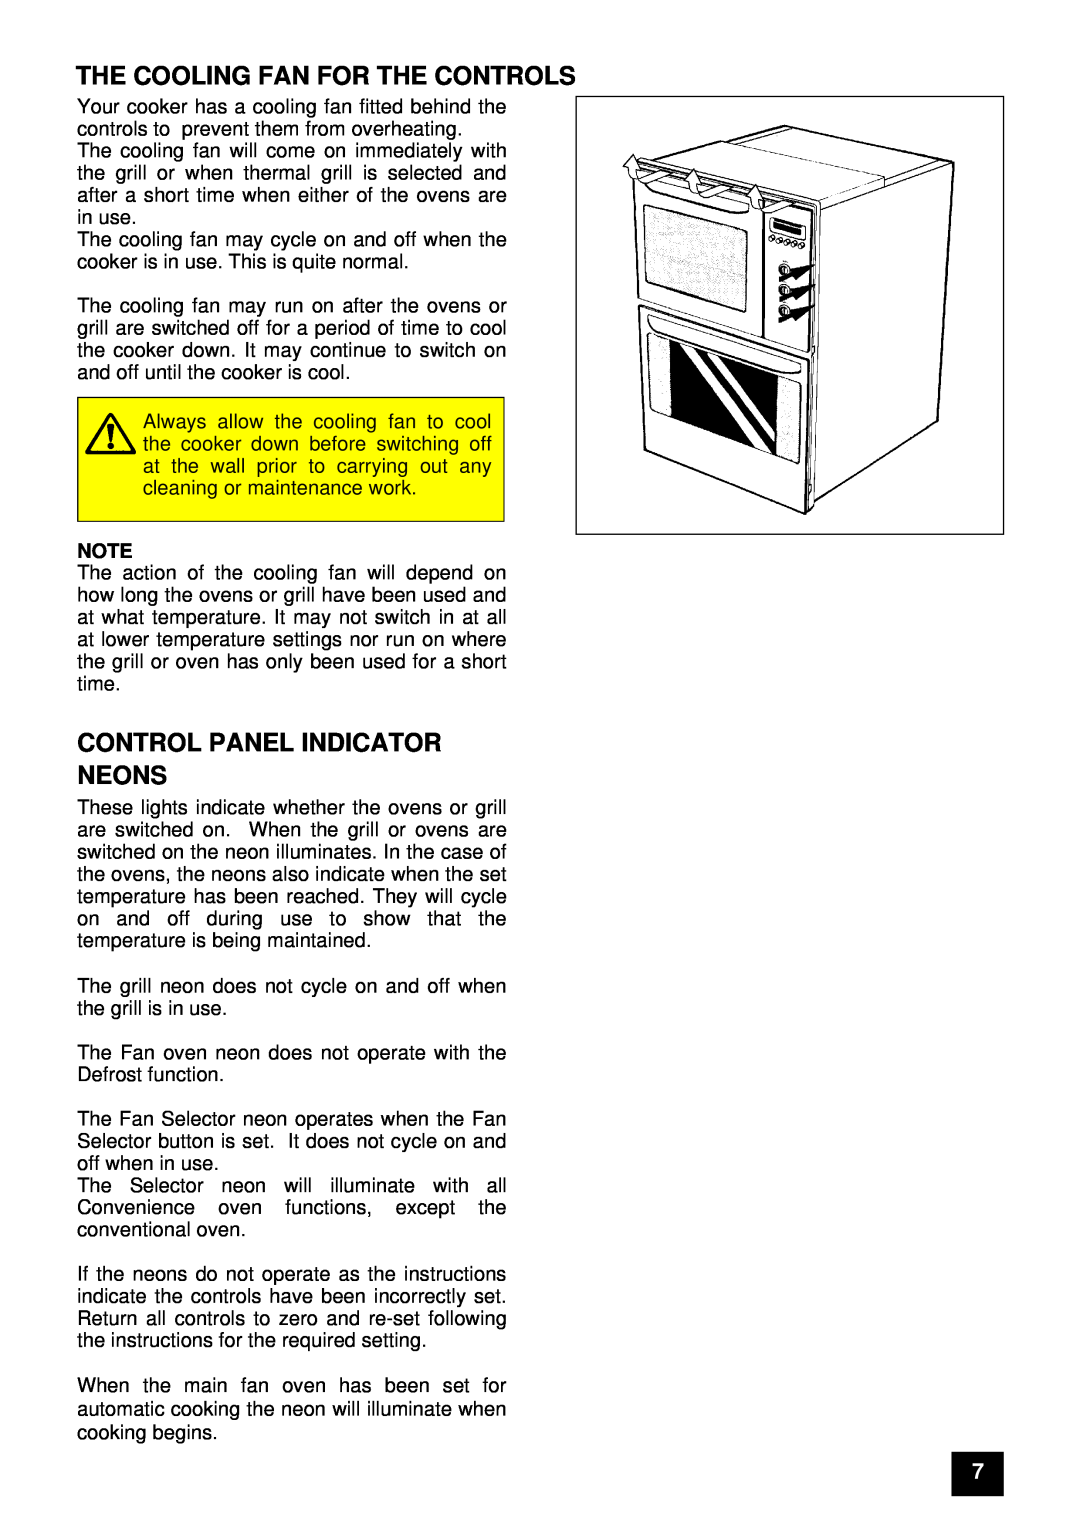 Tricity Bendix E 750 installation instructions The Cooling Fan For The Controls, Control Panel Indicator Neons 